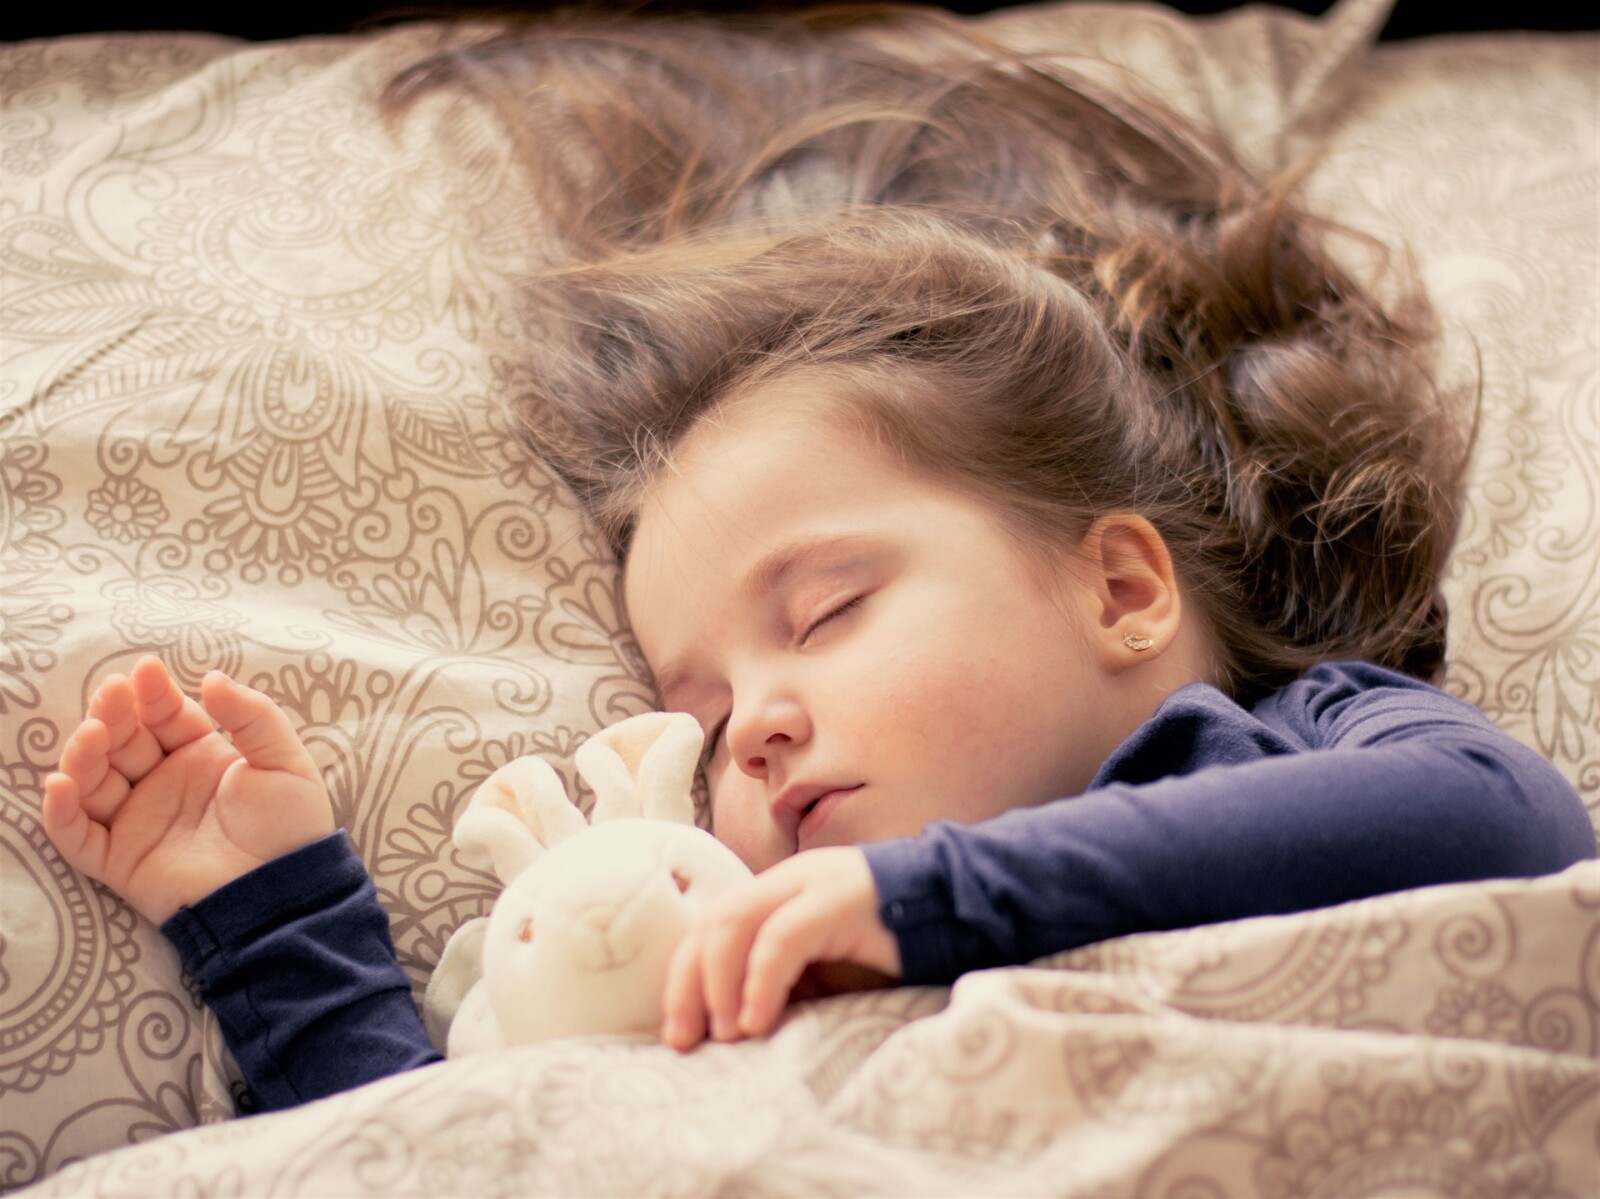 4 Natural Sleep Support Tips for Kids